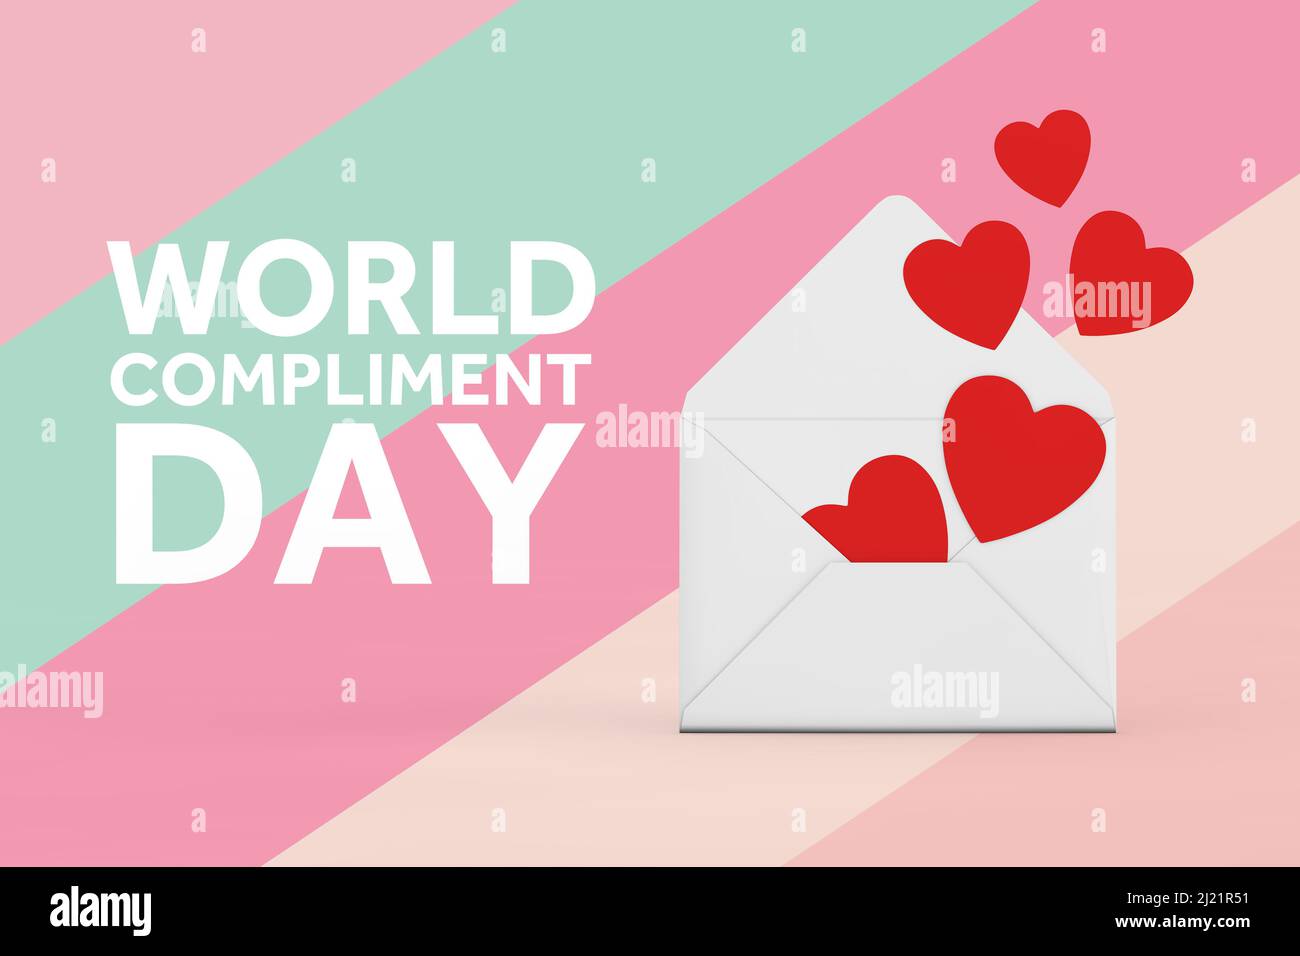 World Compliment Day Concept. Red Hearts Flying Out from White Blank Envelope and World Compliment Day Sign on a multicolored background. 3d Rendering Stock Photo